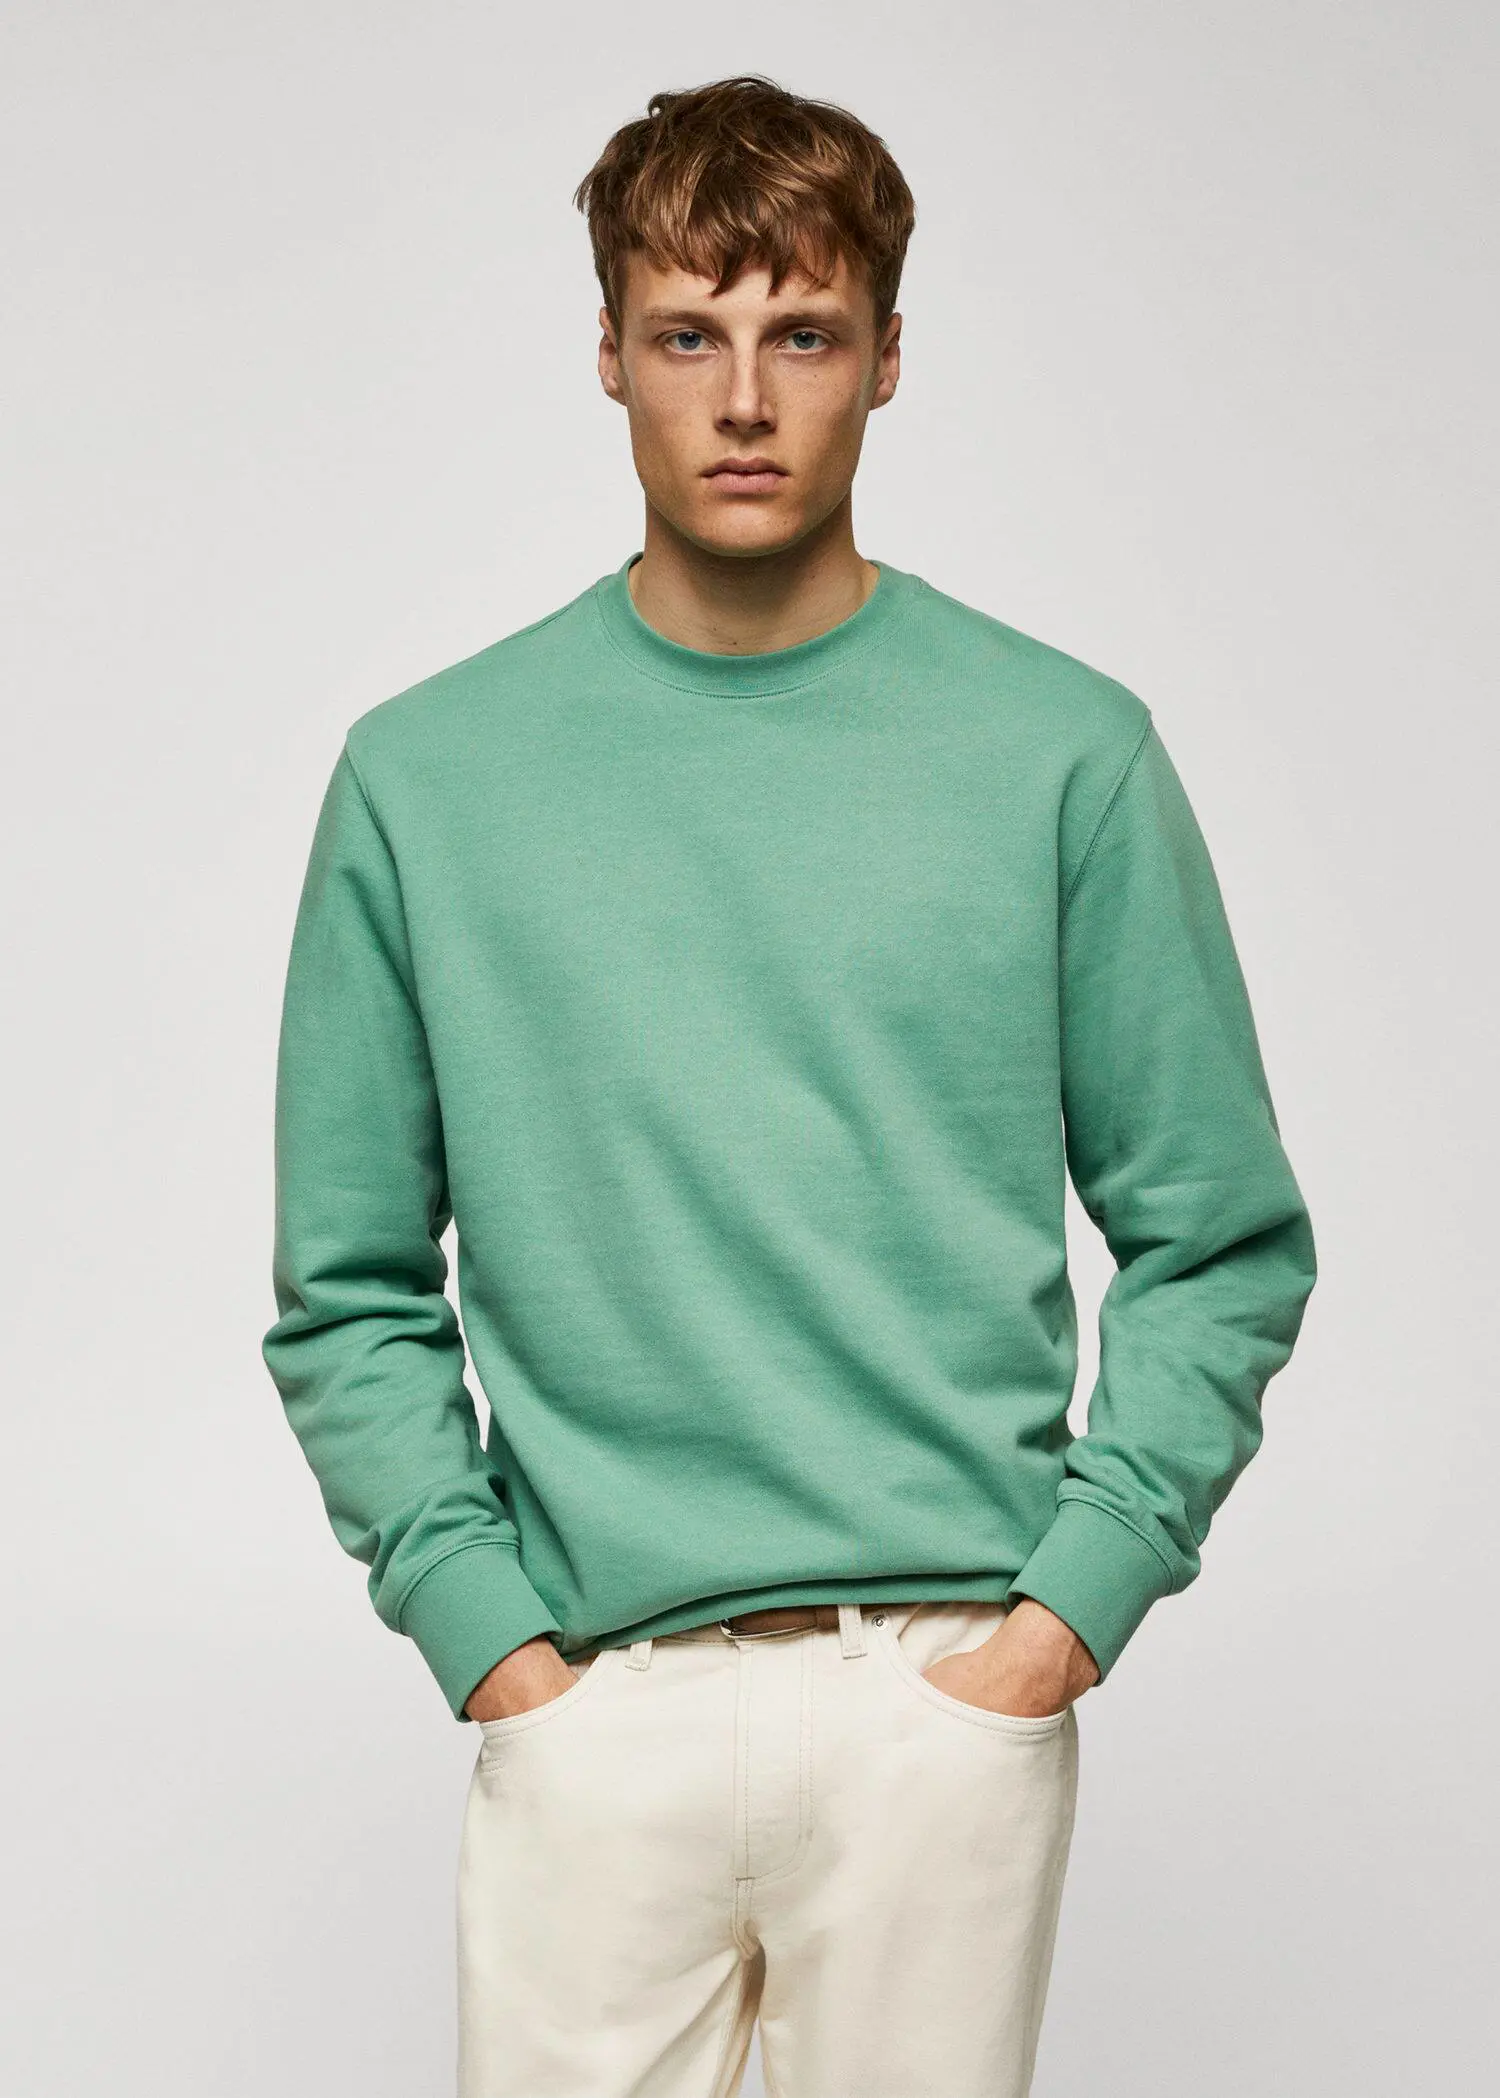 Mango 100% cotton basic sweatshirt . a man in a green sweatshirt is posing for a picture. 